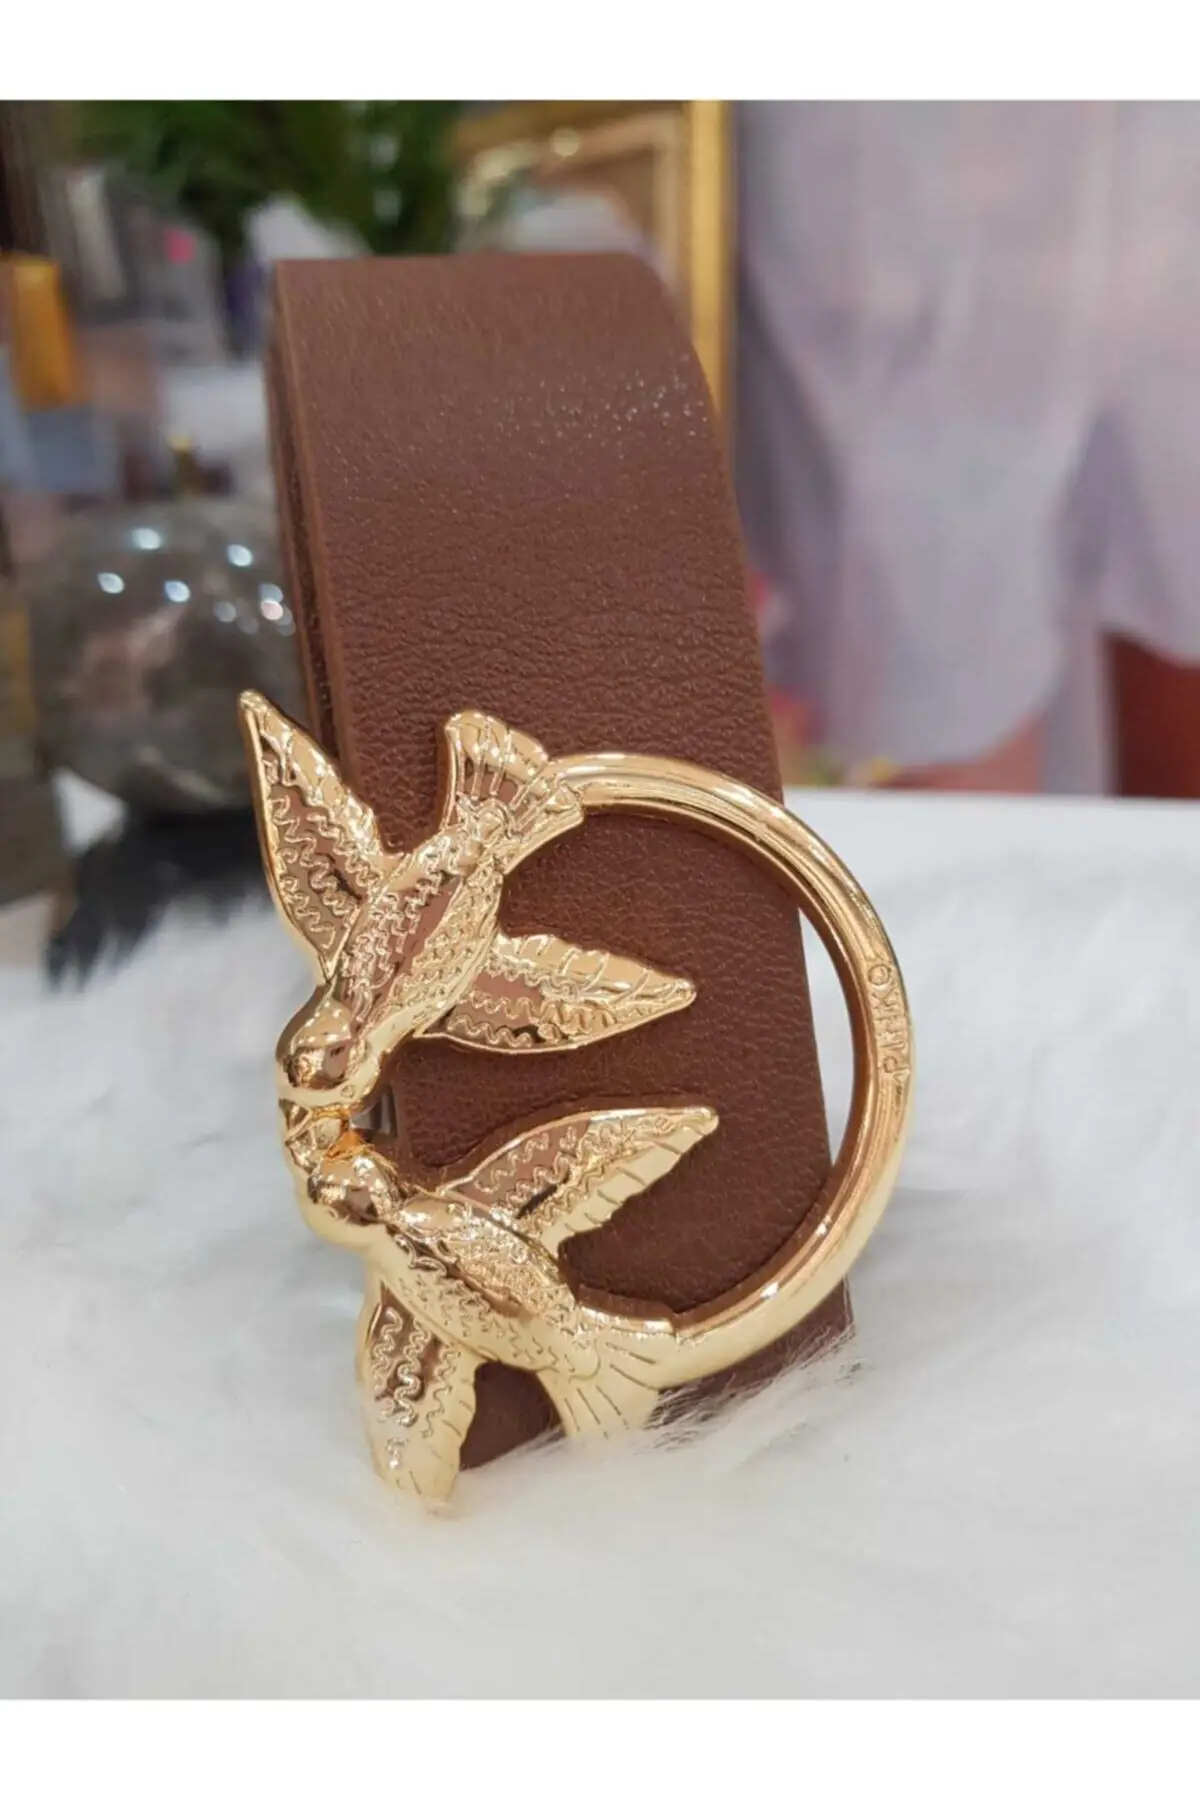 

2022 New Fashion, Women's Belt, Tan Colored Belt,Gold Bird Buckle,Stylish and Suitable for Daily Use,Xs-S-M-L-XL Sizes Available